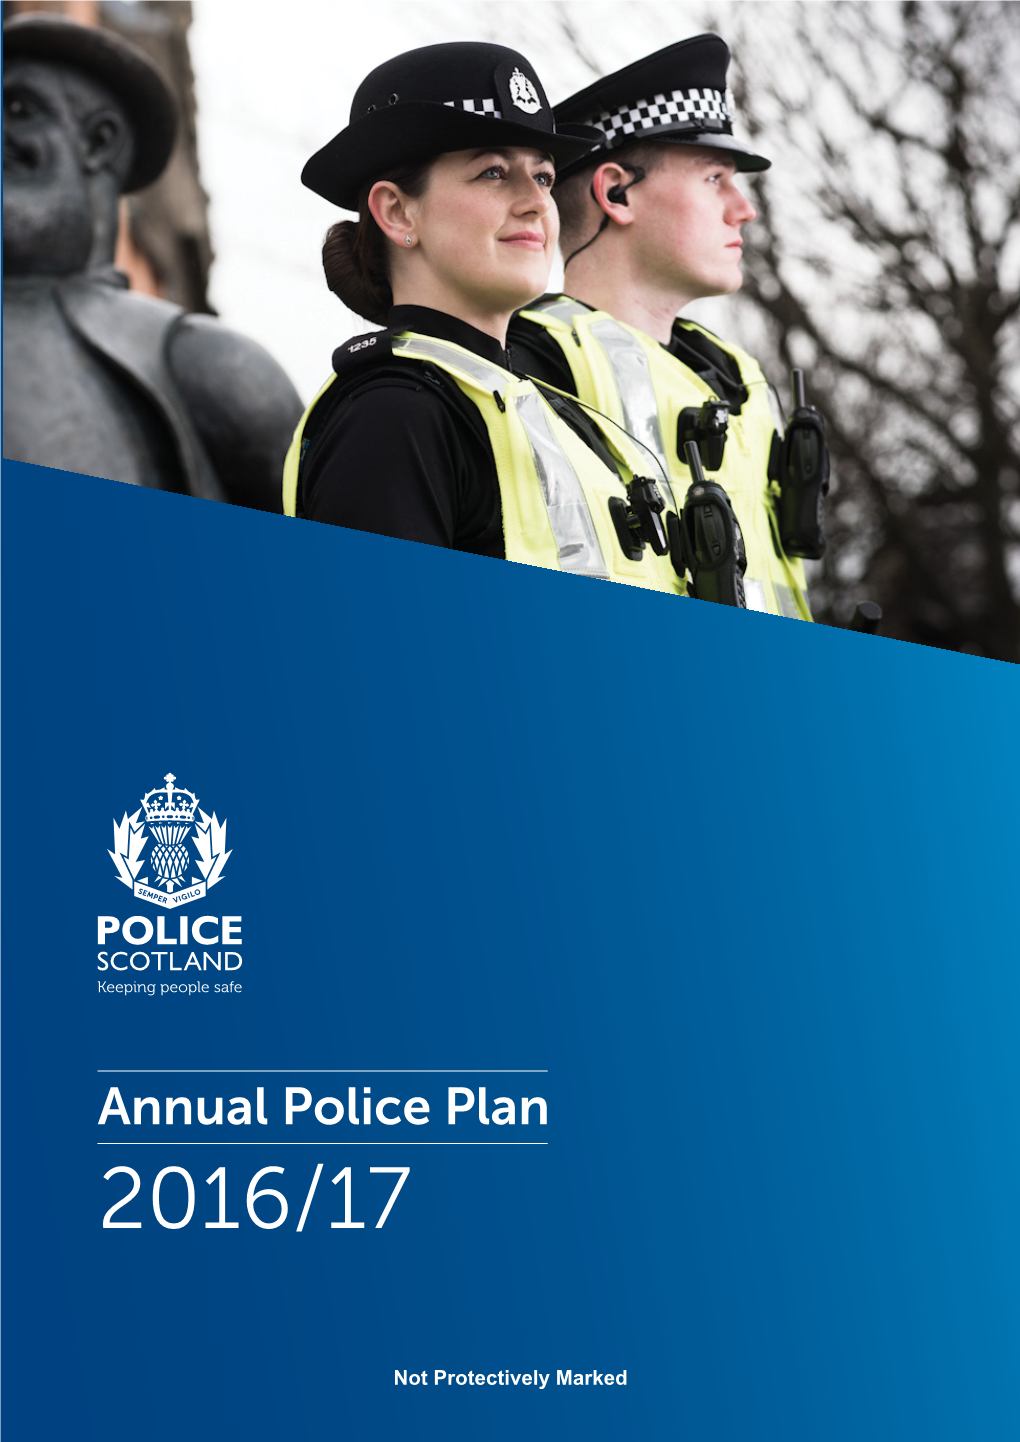 Annual Police Plan 2016/17